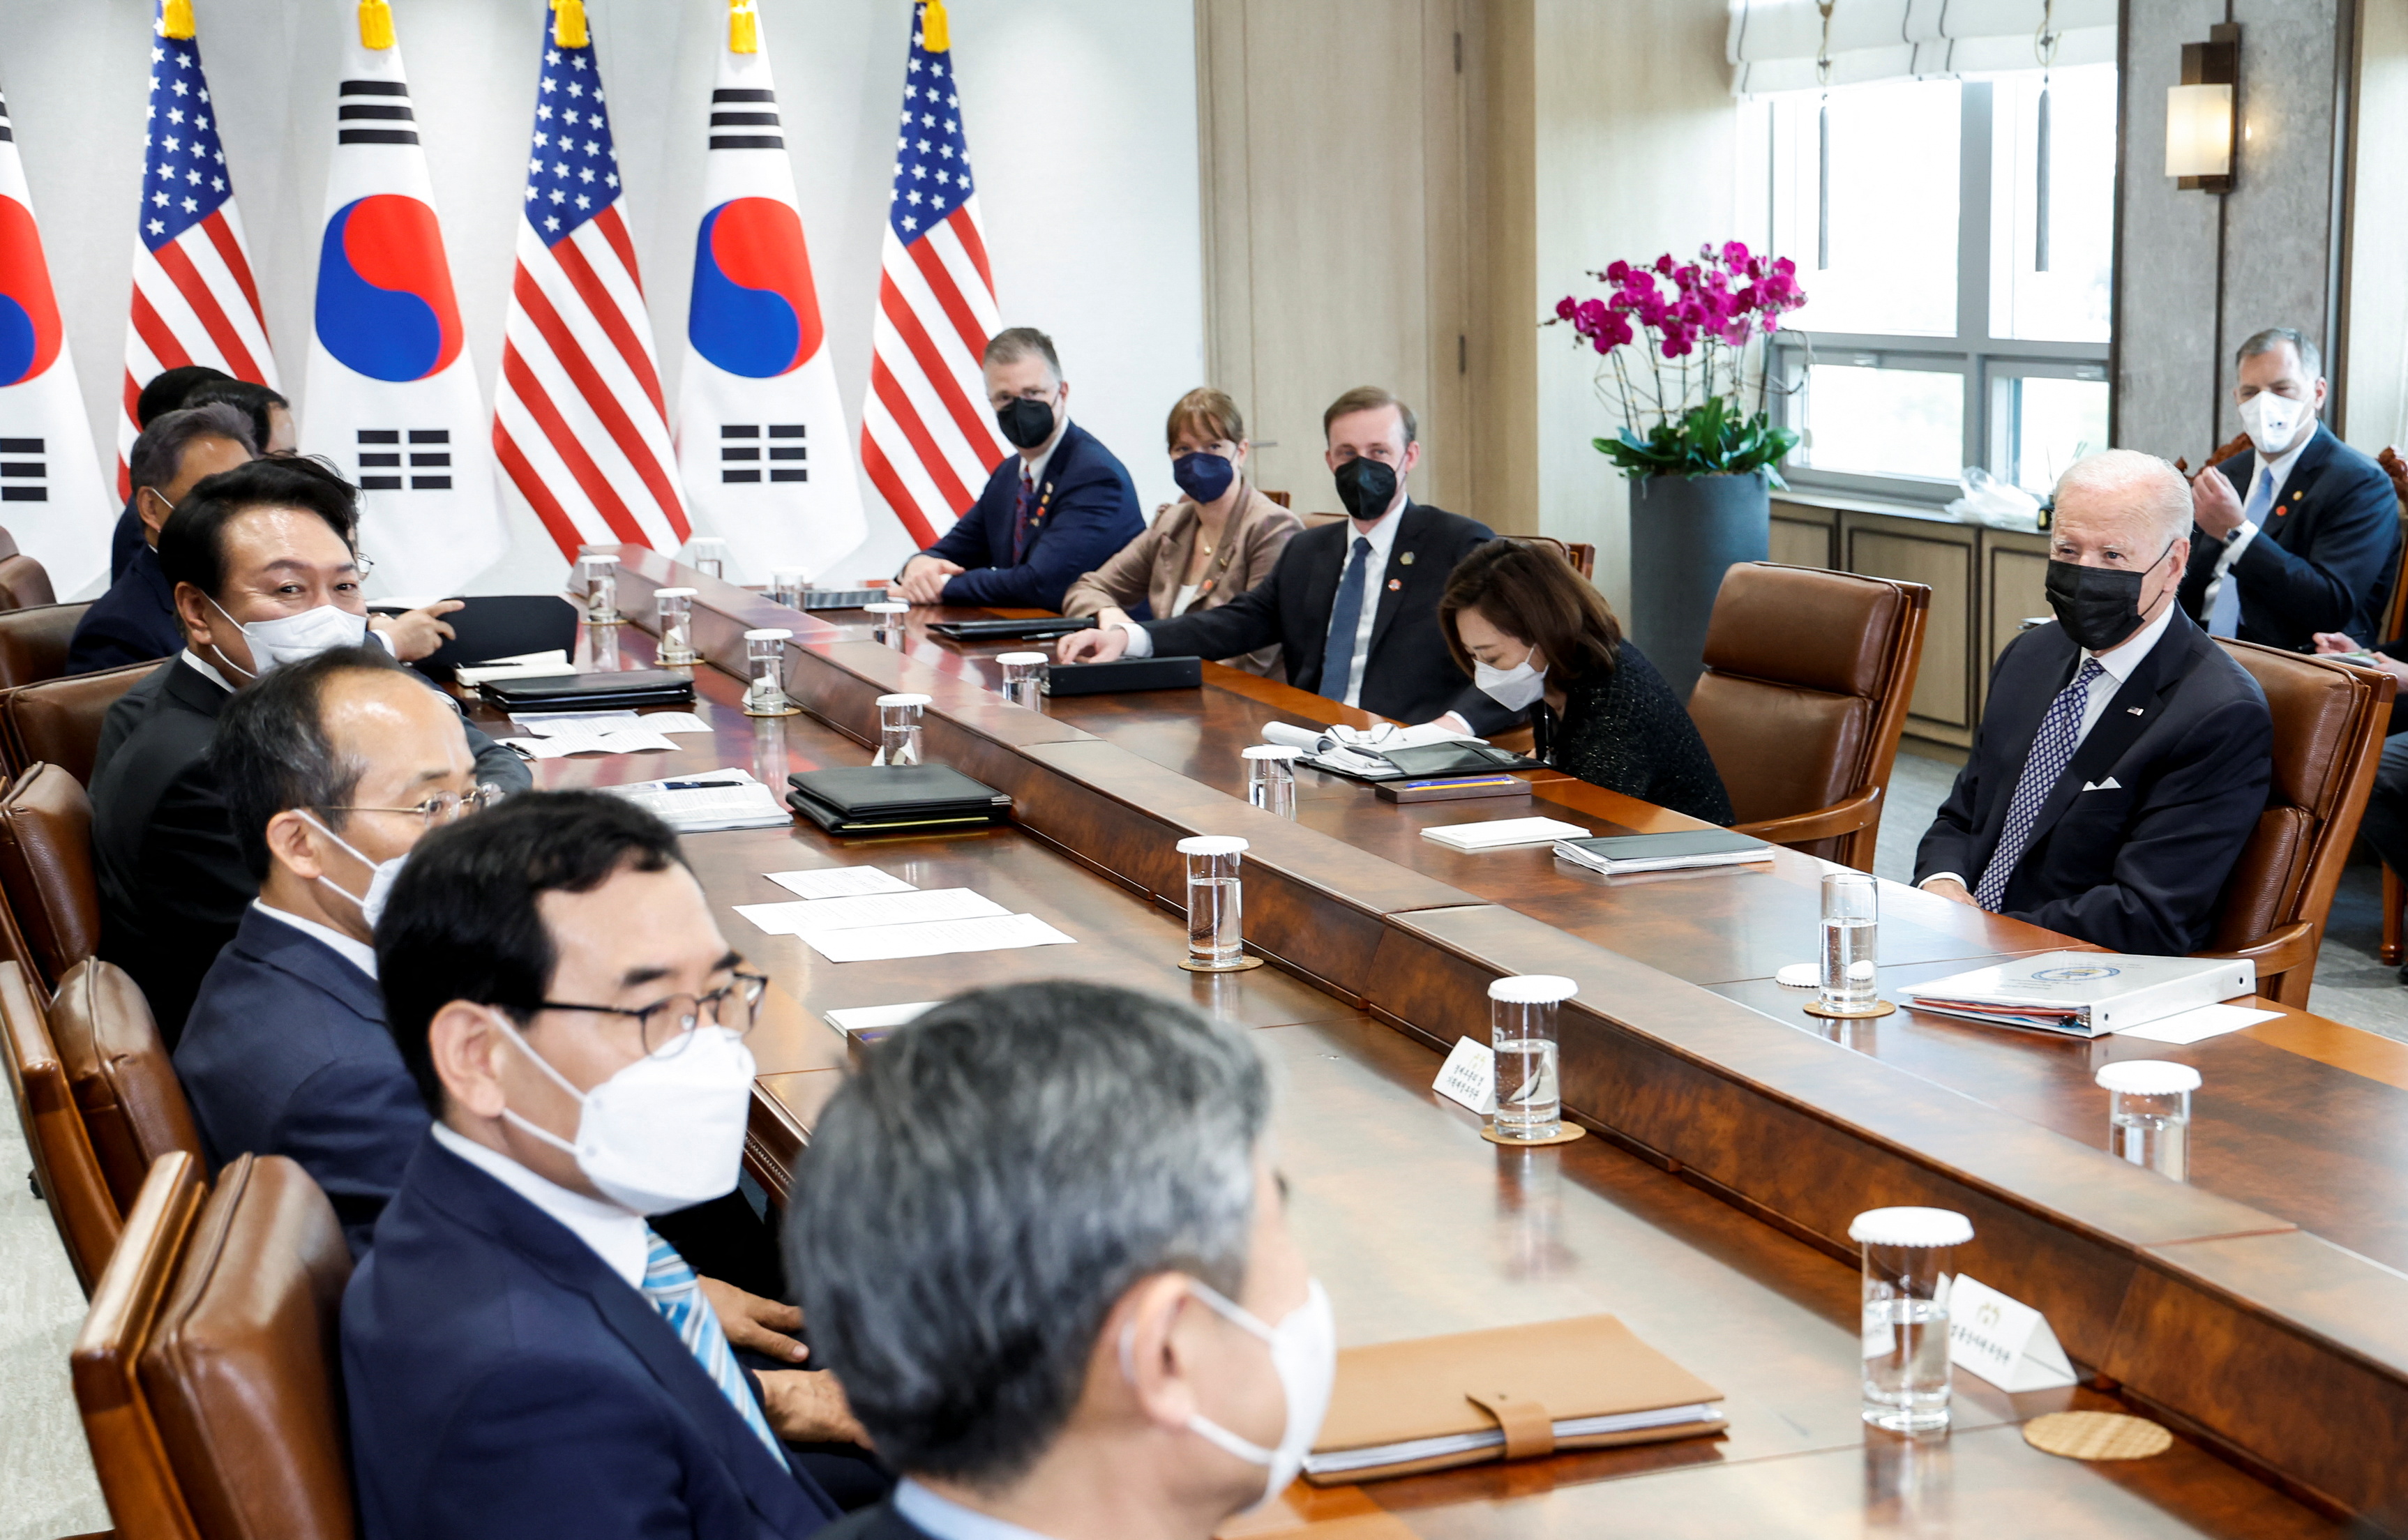 U.S. President Biden attends a bilateral meeting with South Korean counterpart Yoon Seok-youl in Seoul